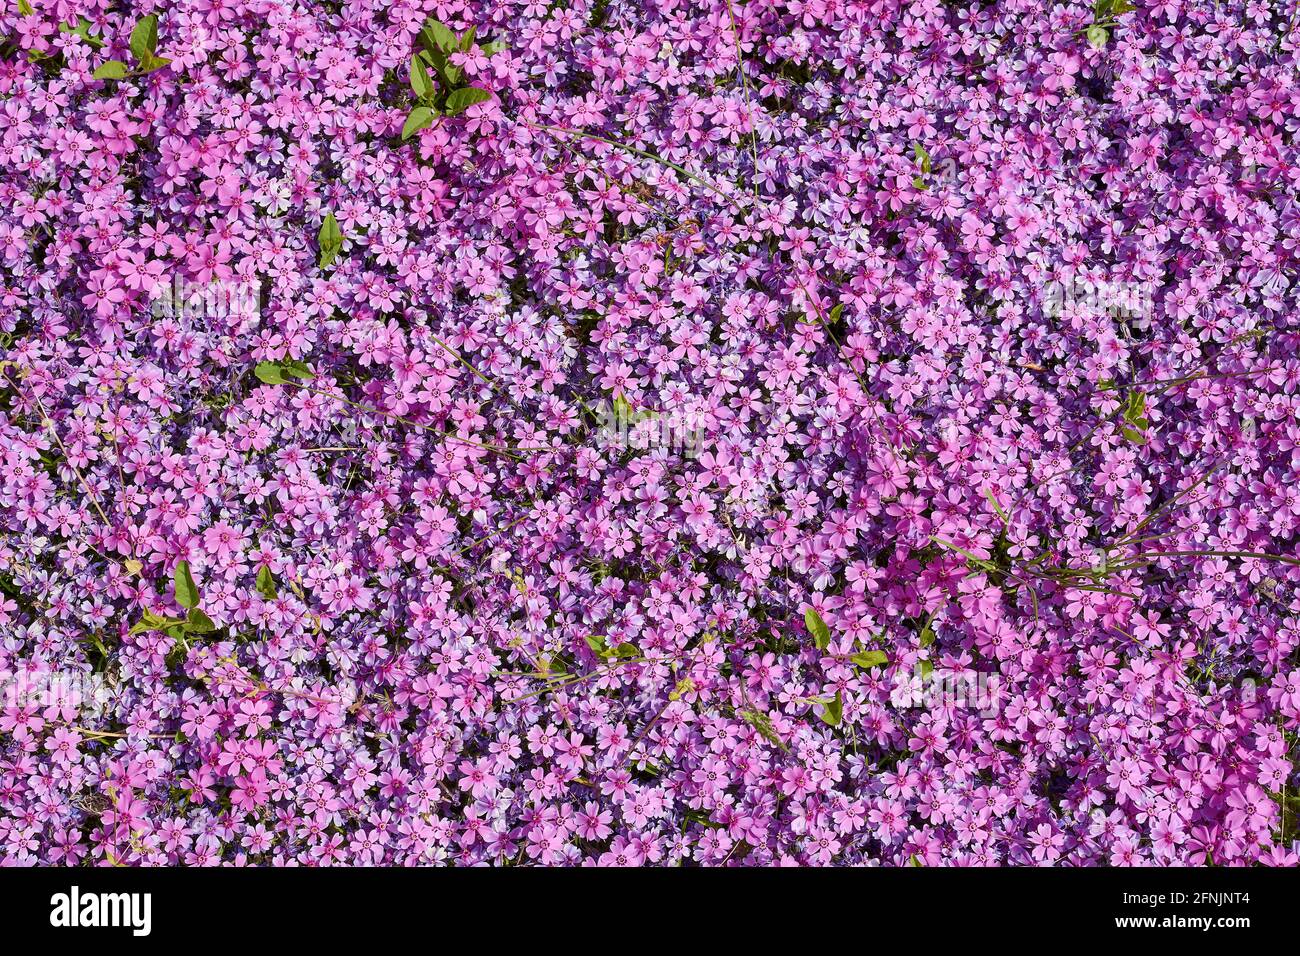 Beautiful little purple flowers cover the flower bed like a carpet. Stock Photo